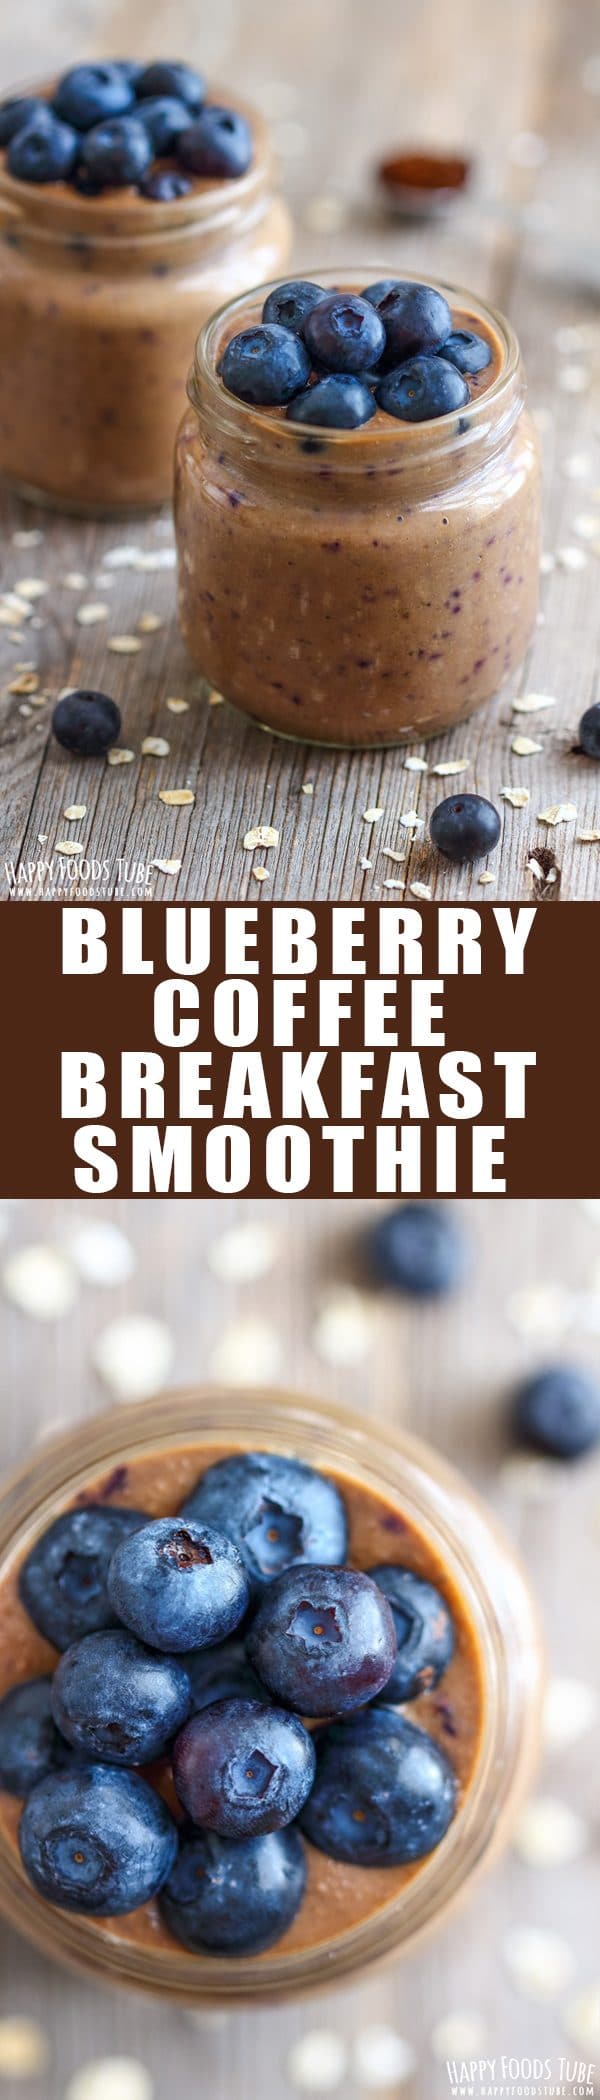 How To Make Blueberry Coffee Smoothie In Tarakan